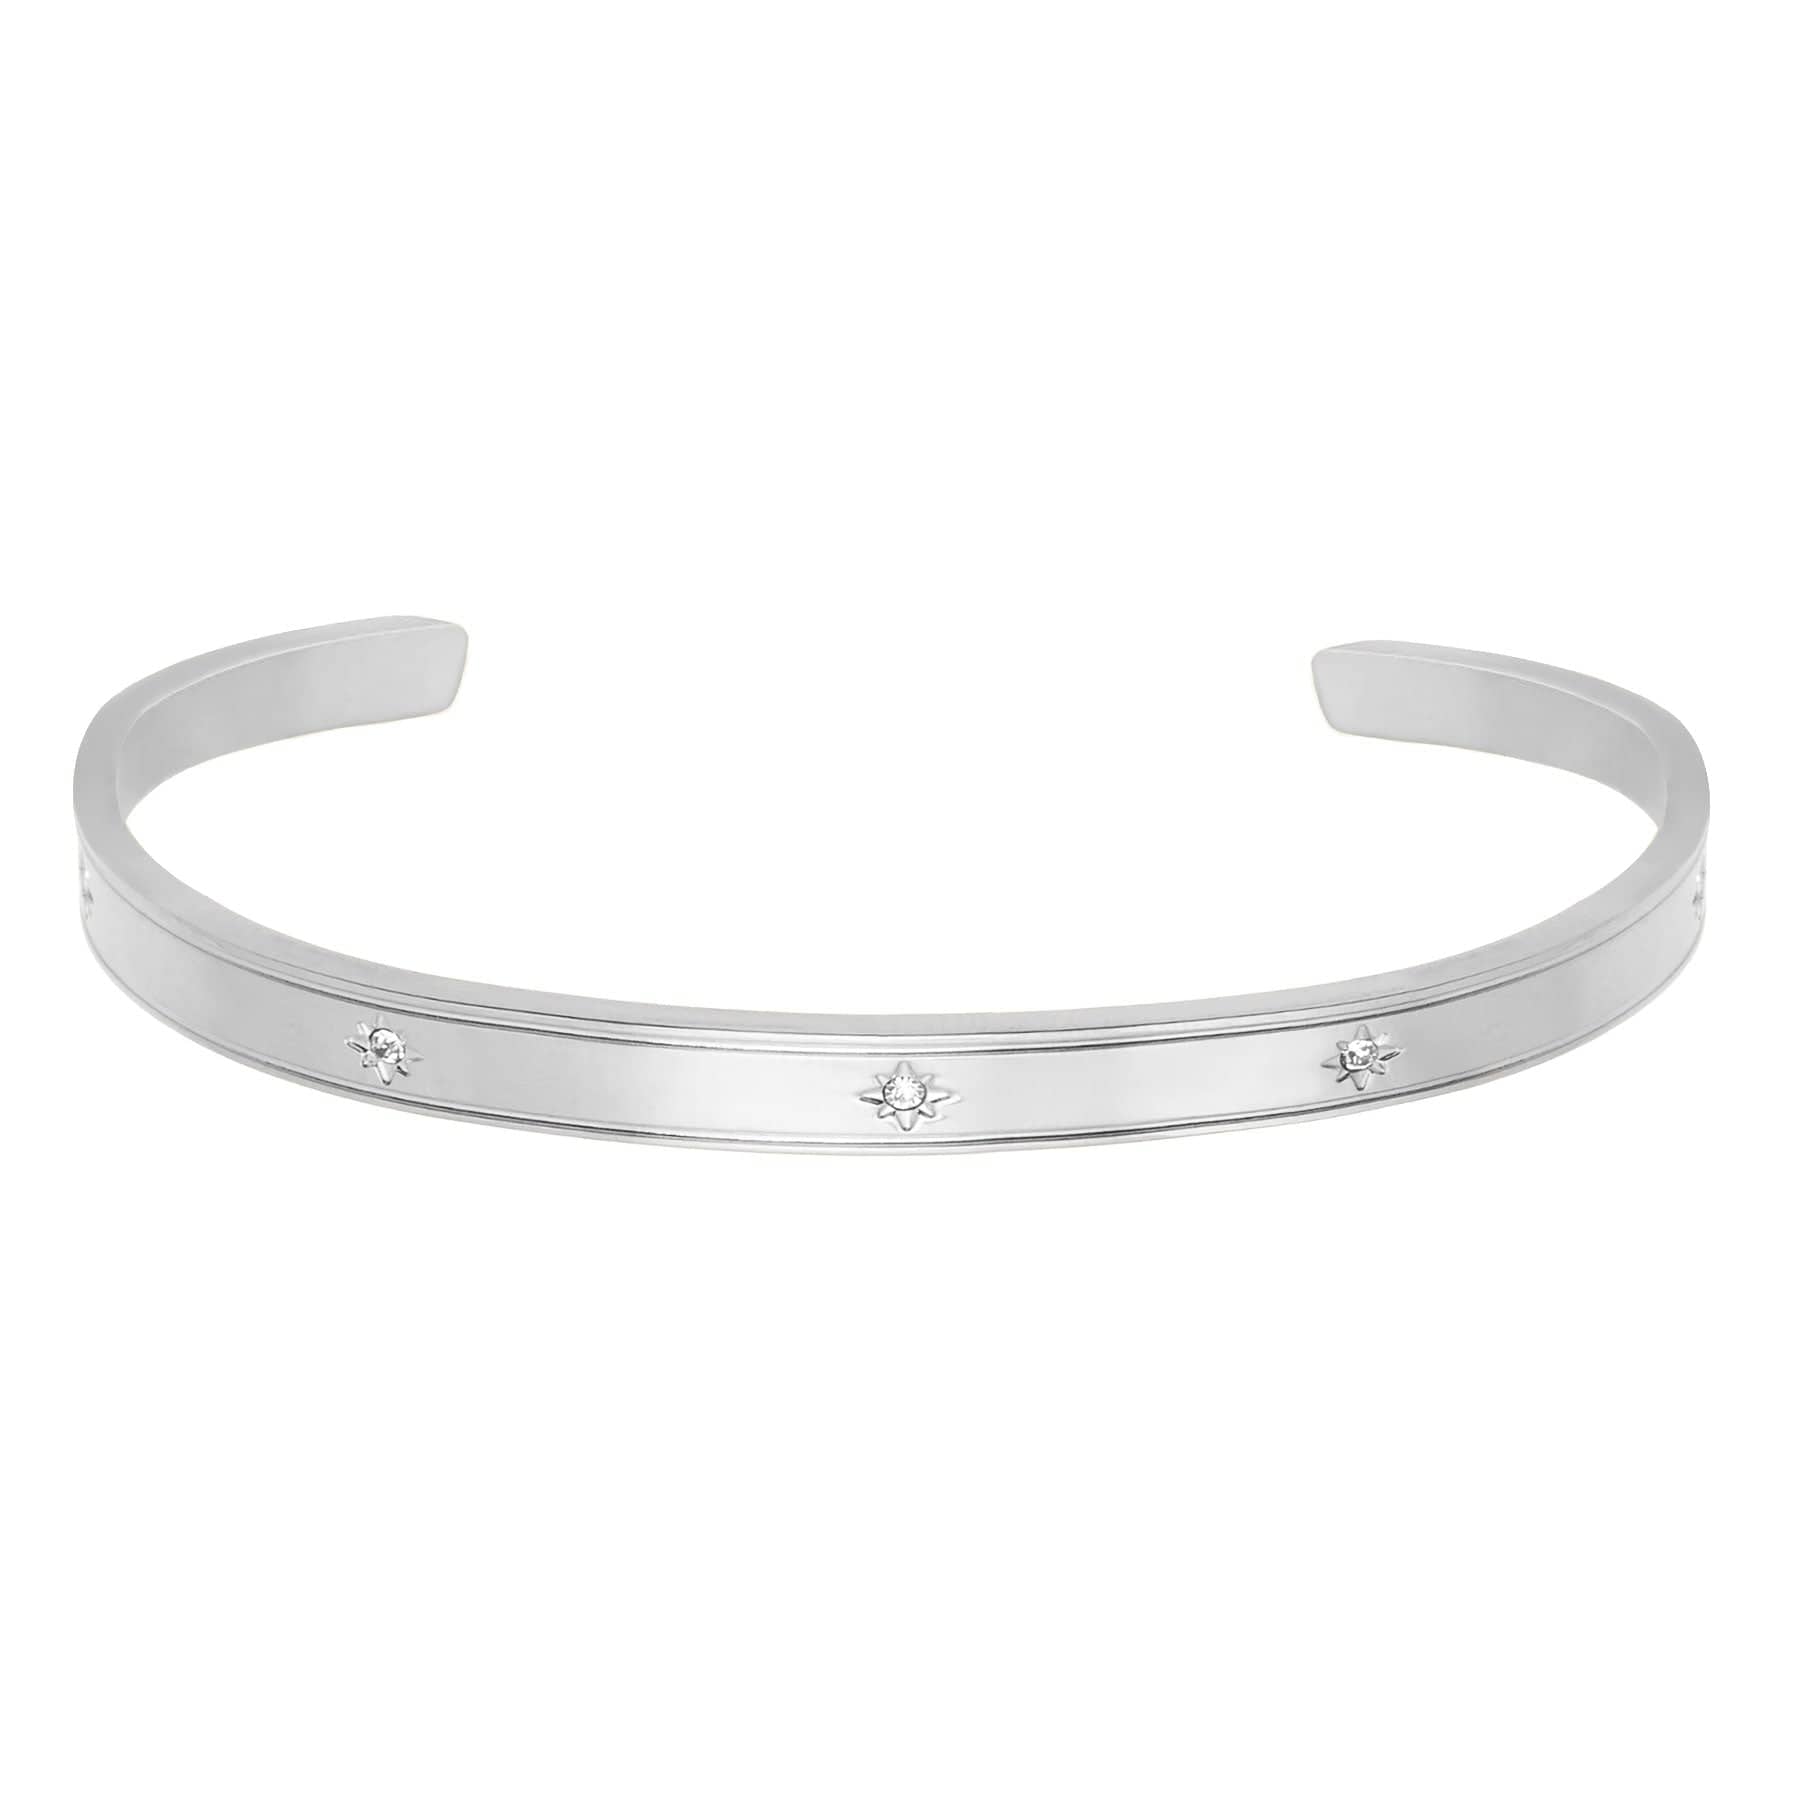 BohoMoon Stainless Steel Astral Cuff Bracelet Silver